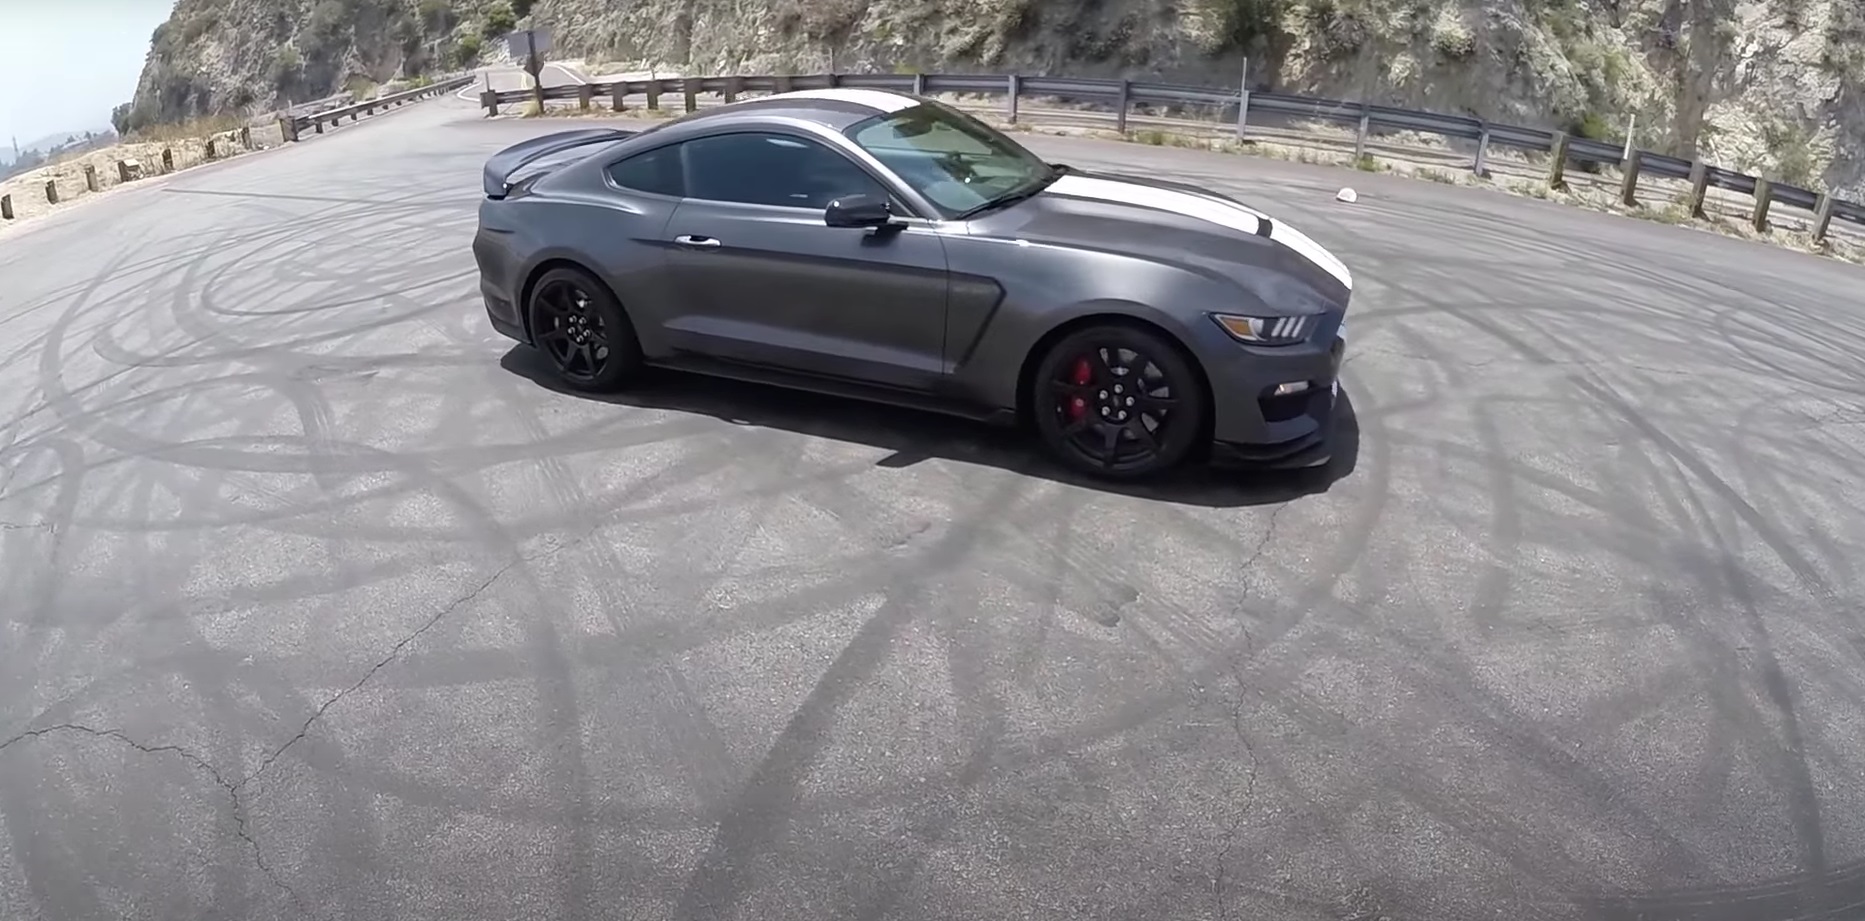 Video: 2016 Ford Mustang Shelby GT350R - POV Canyon Drive